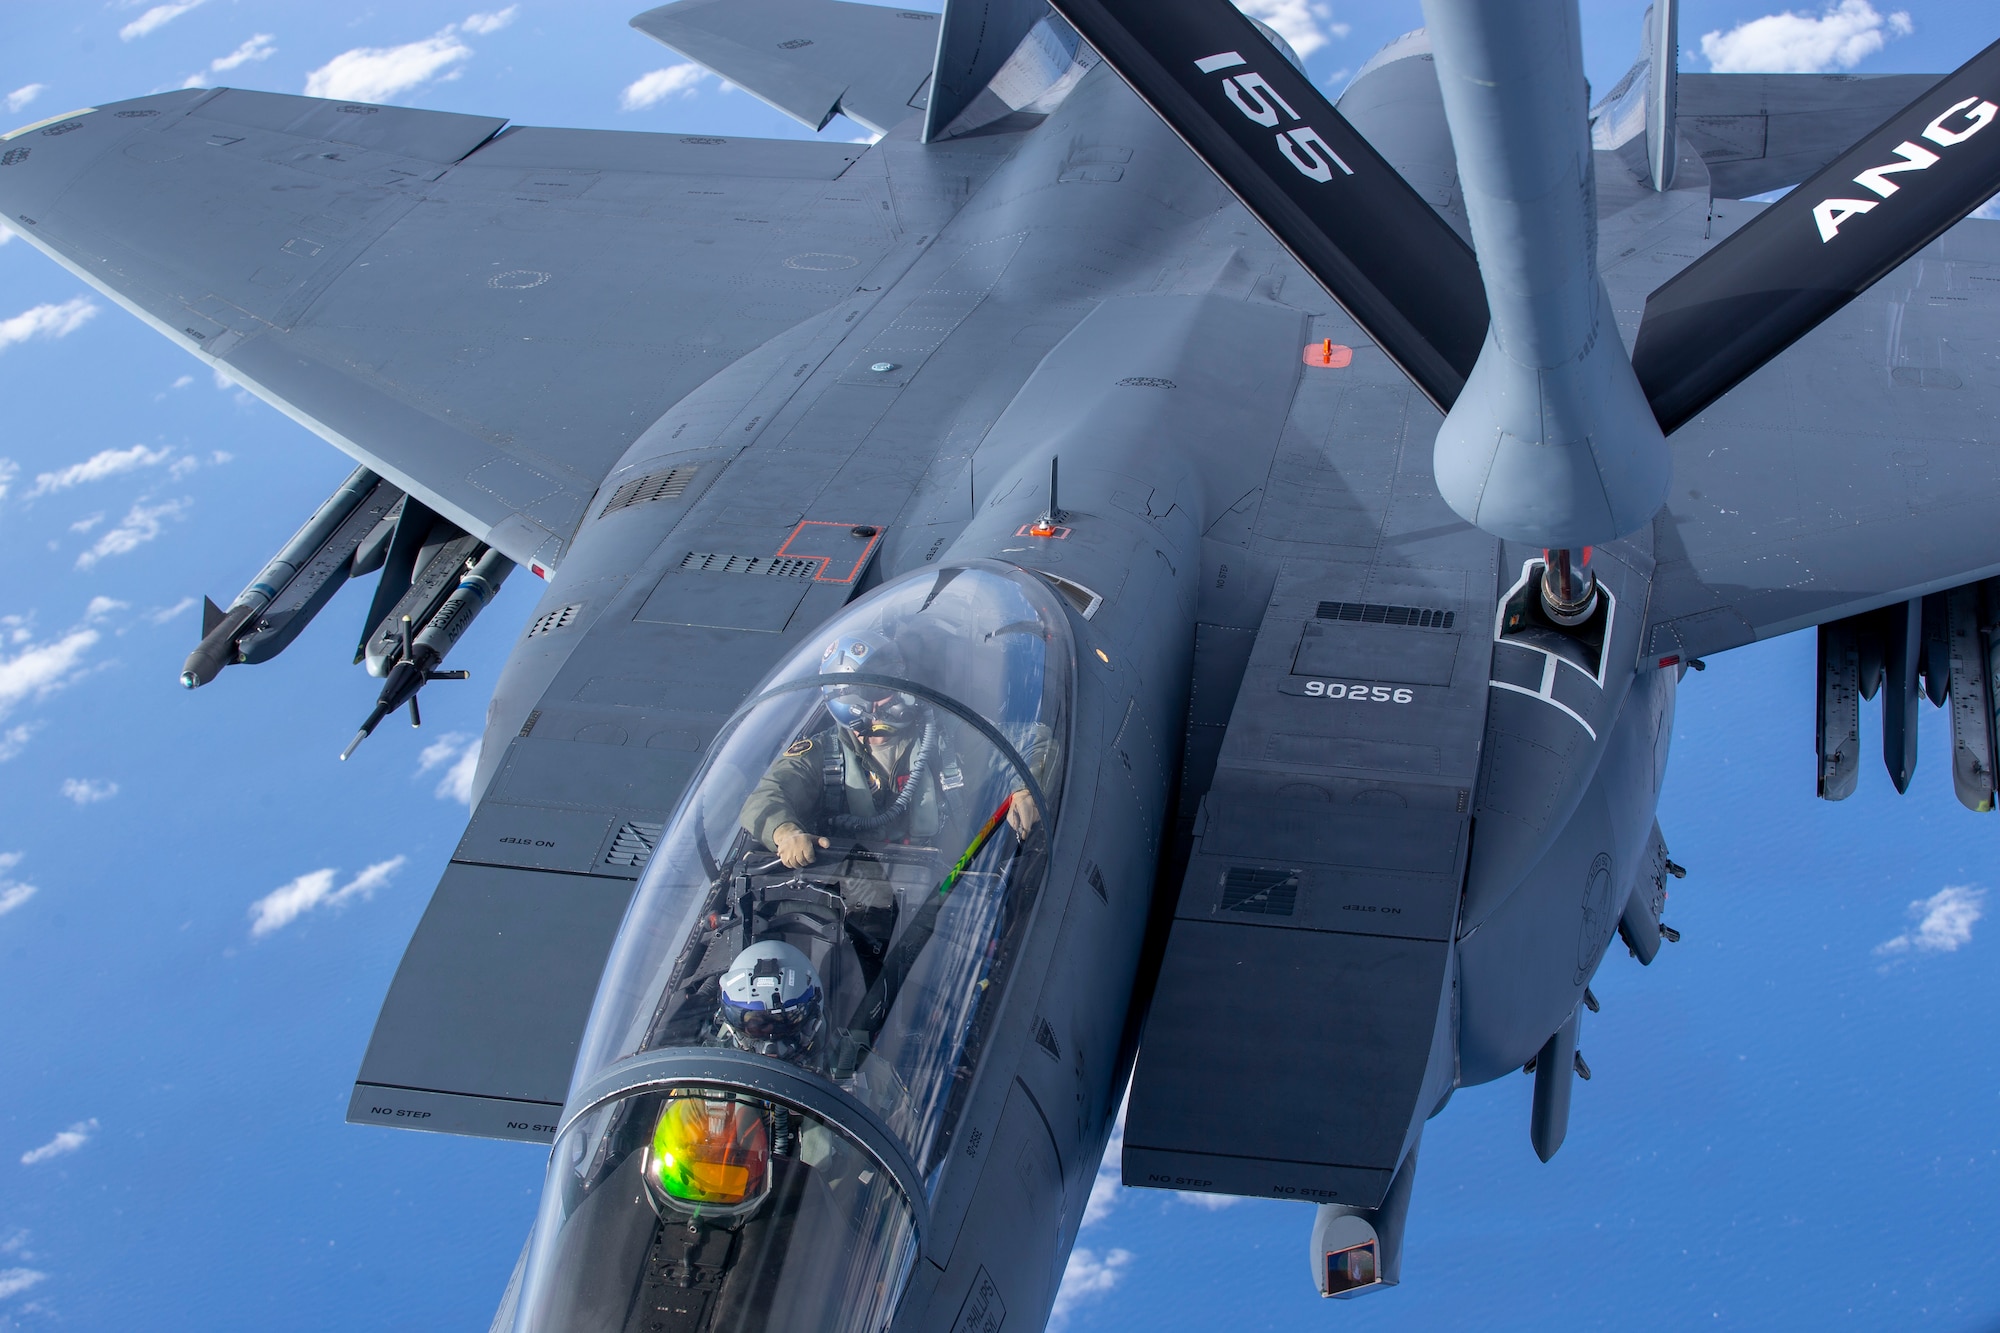 A 96th Test Wing F-15E Strike Eagle prepares for in-flight refueling from a 155th Air Refueling Wing KC-135 Stratotanker during exercise Emerald Flag over the Gulf of Mexico, Dec. 3, 2020. More than 25 agencies participated in the exercise at Eglin Air Force Base, Fla. The exercise incorporated ground, space, cyberspace and air platforms for joint test and experimentation. (U.S. Air Force photo by Staff Sgt. Joshua Hoskins)